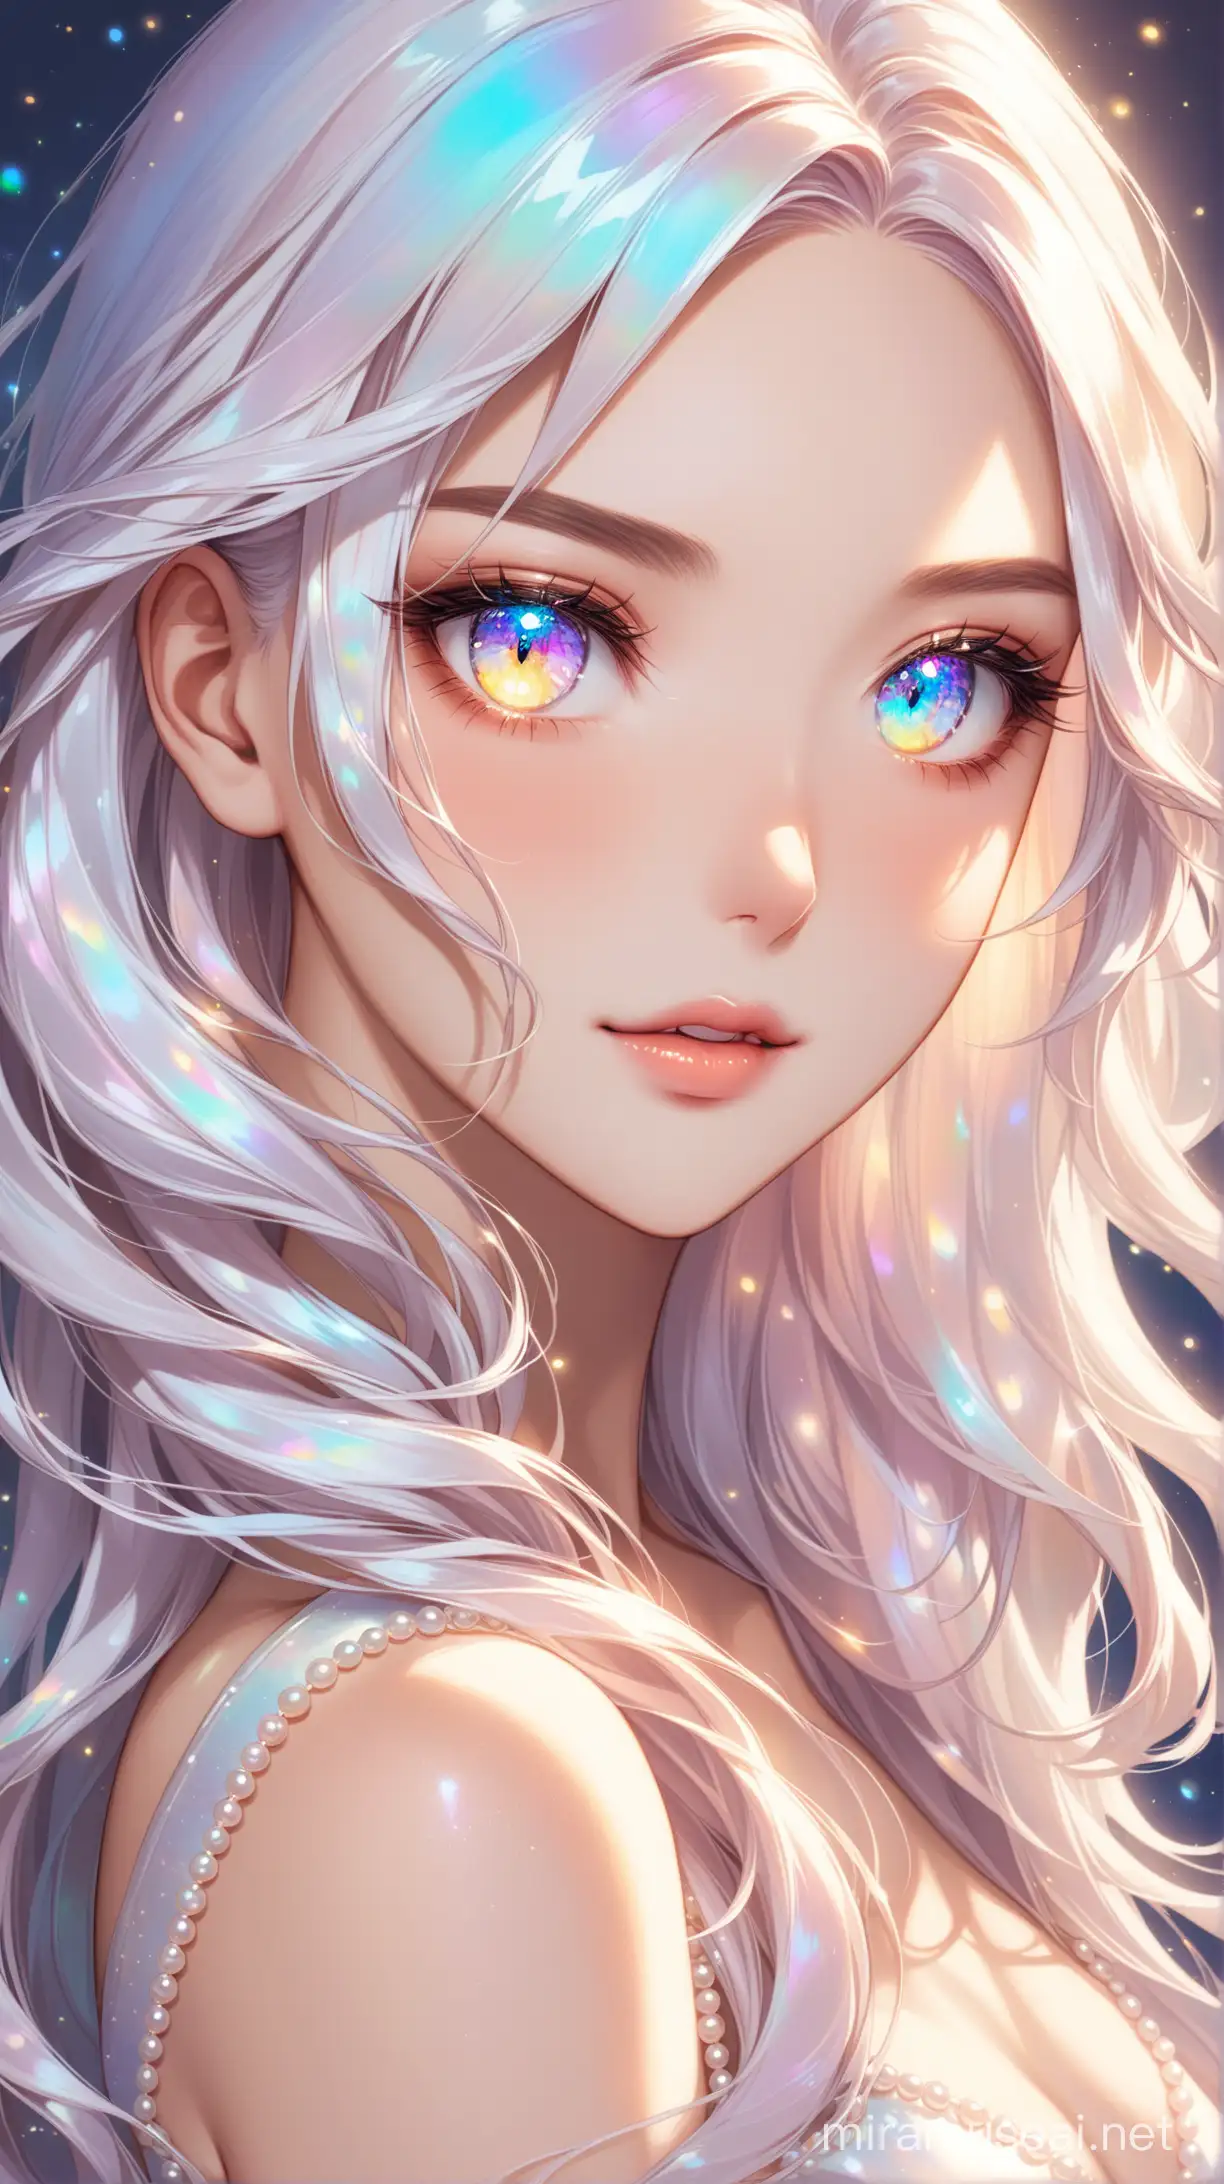 Ethereal Woman with Pearlescent Hair and Opalescent Eyes